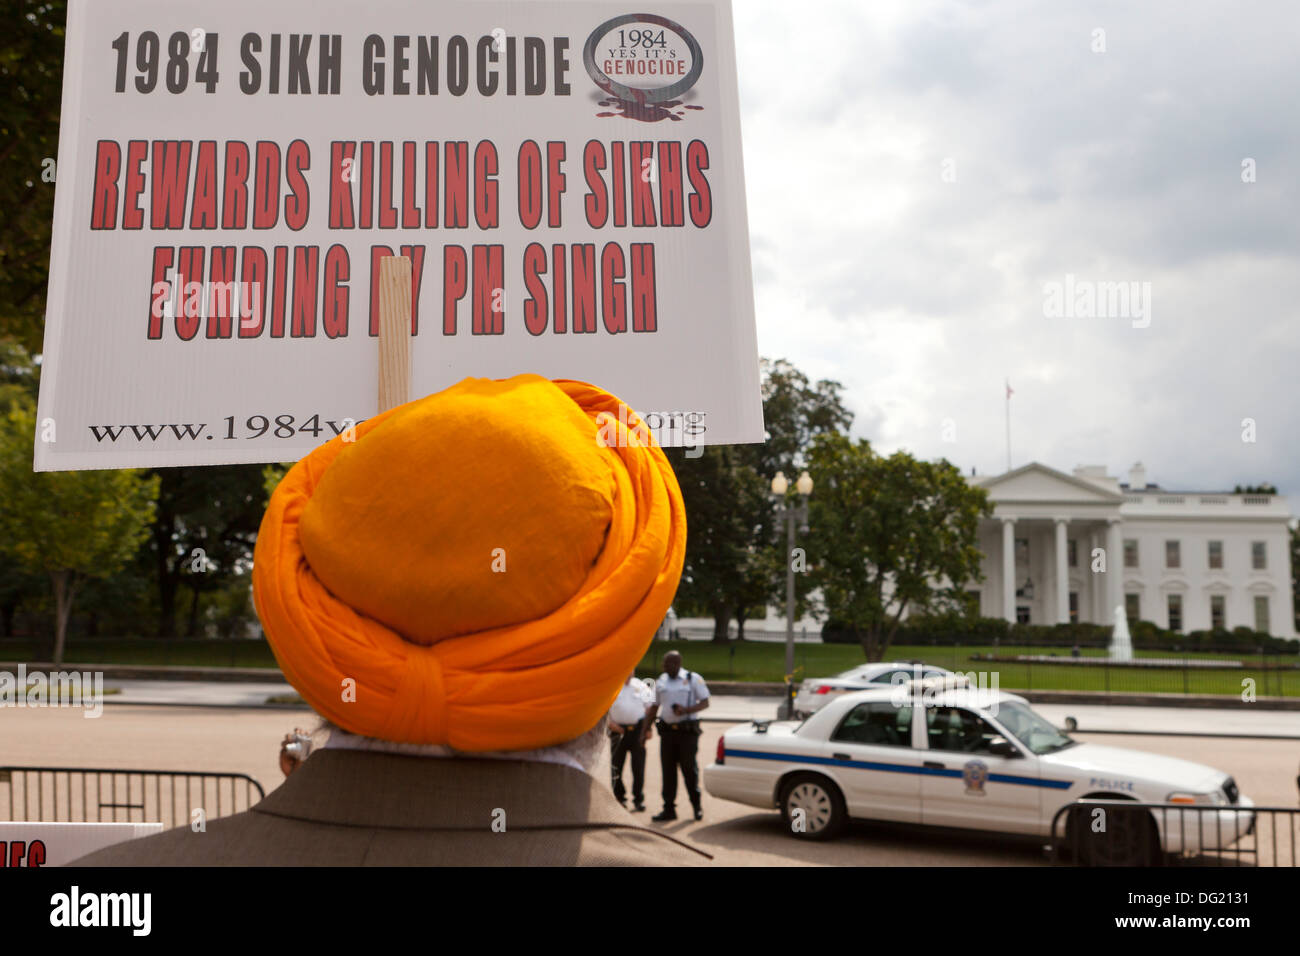 Sikhs For Justice protest against genocide in India - Washington, DC USA Stock Photo